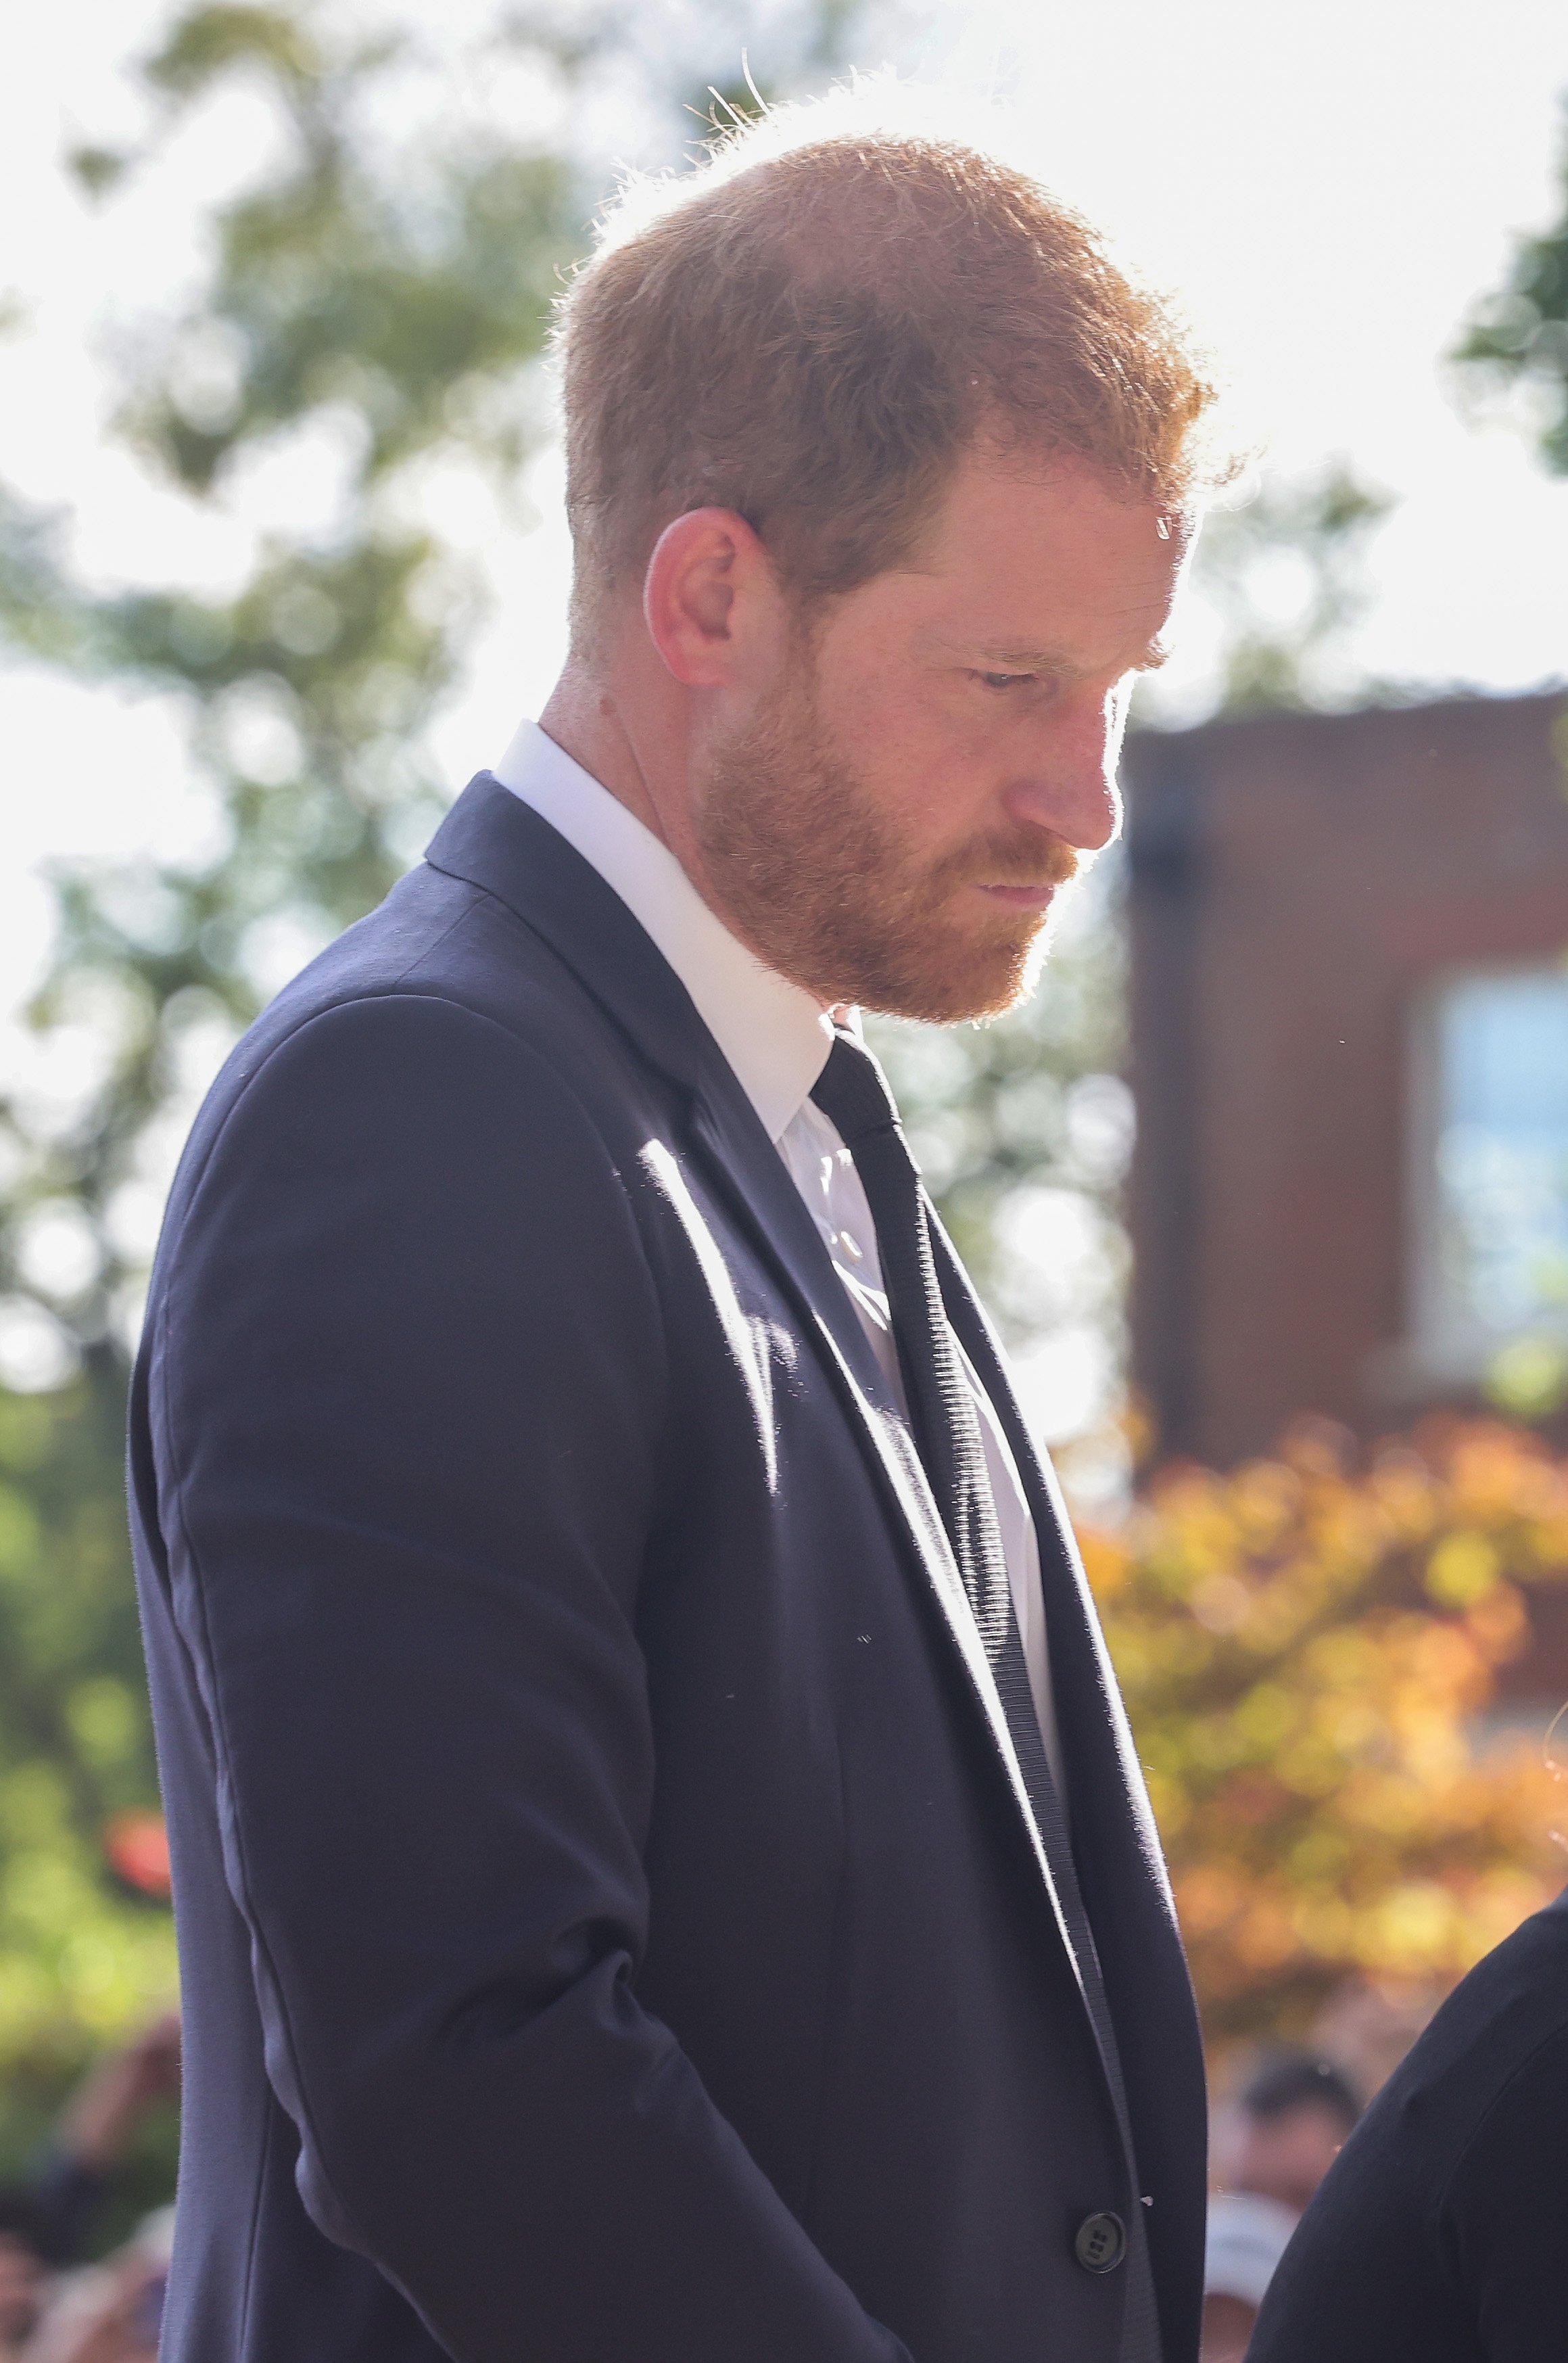 Prince Harry at the Windsor gates in England, 2022. | Source: Getty Images 